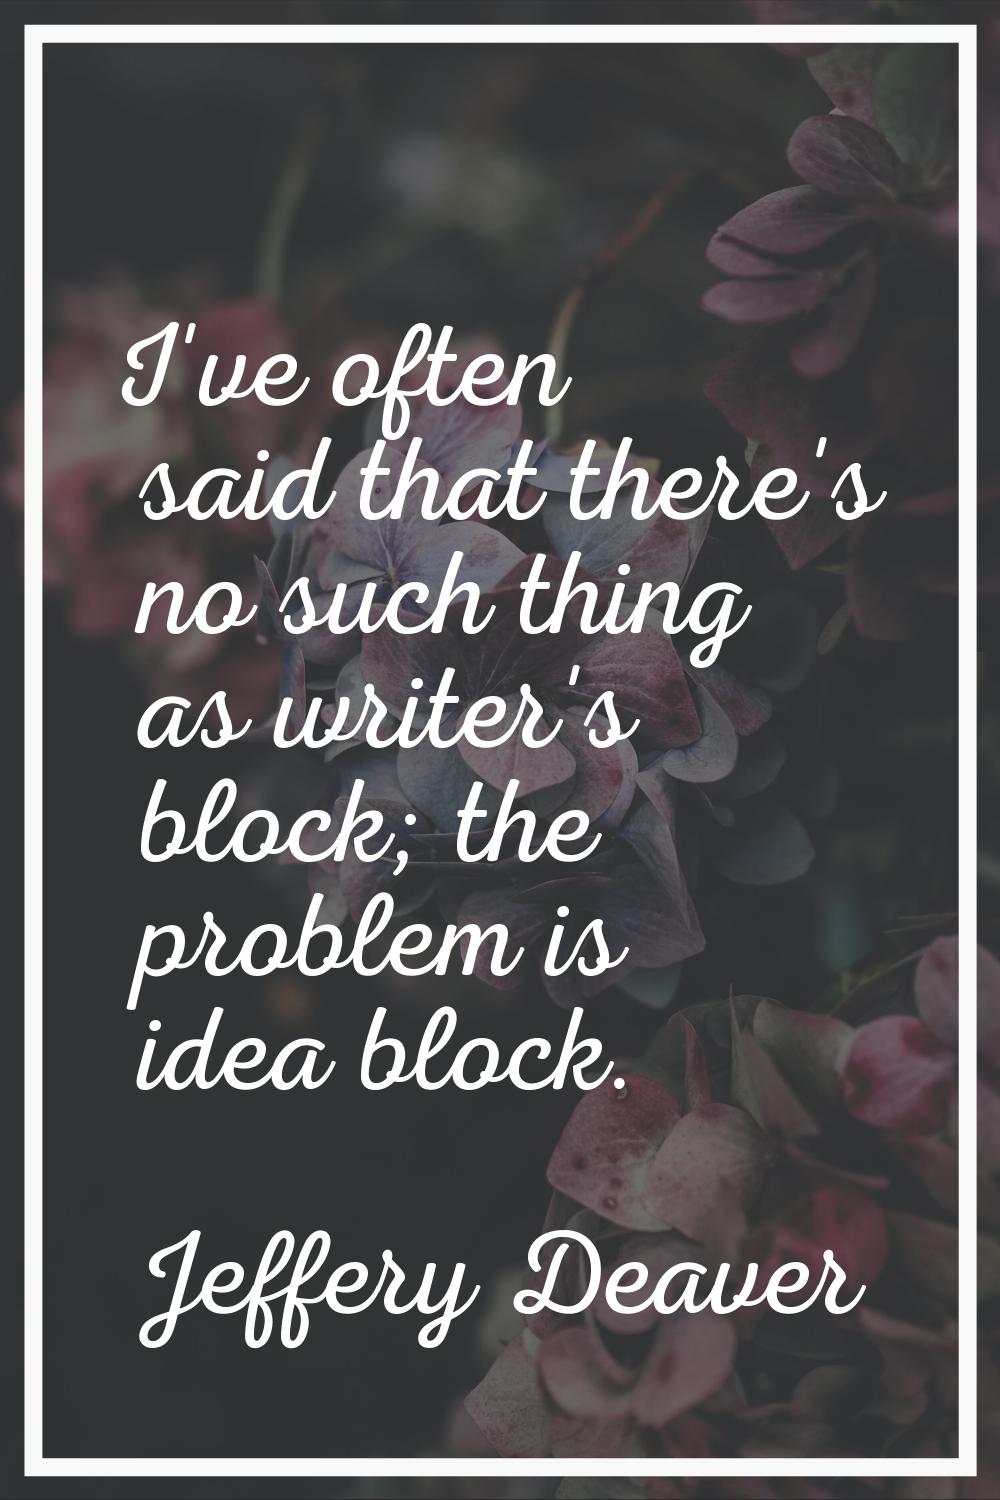 I've often said that there's no such thing as writer's block; the problem is idea block.